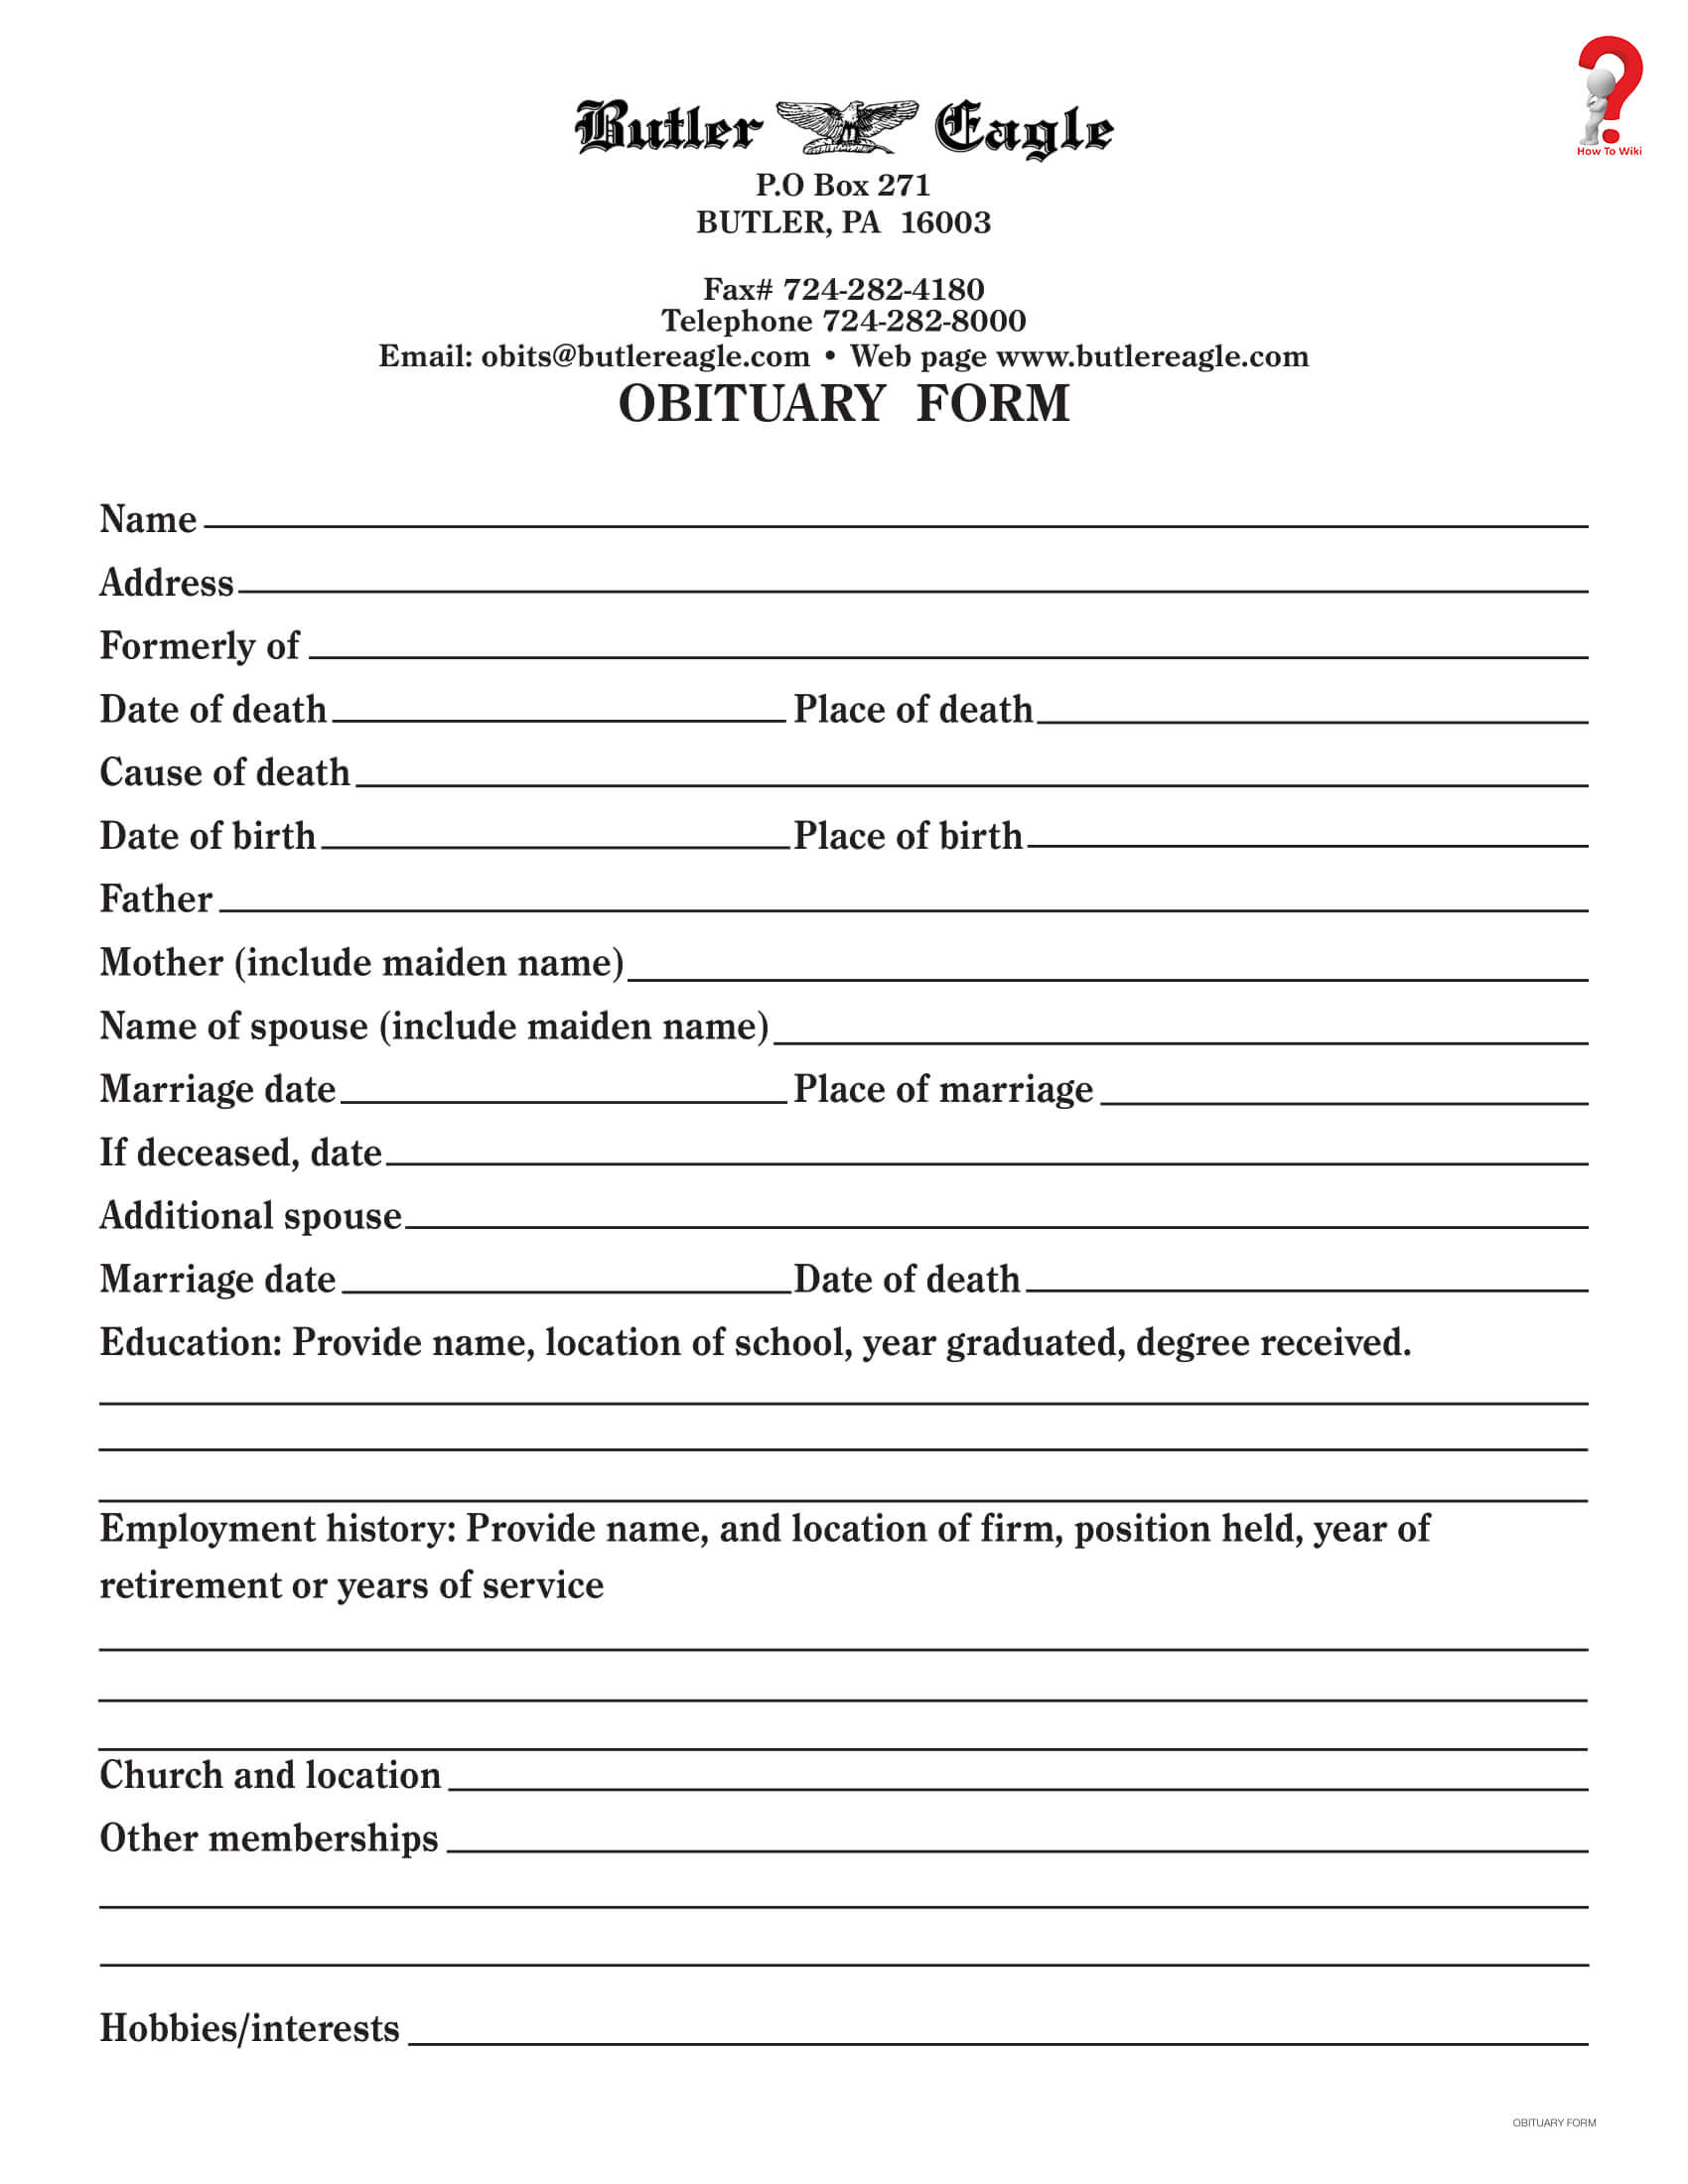 How To Write An Obituary Template In Simple Steps | How To Wiki Throughout Fill In The Blank Obituary Template